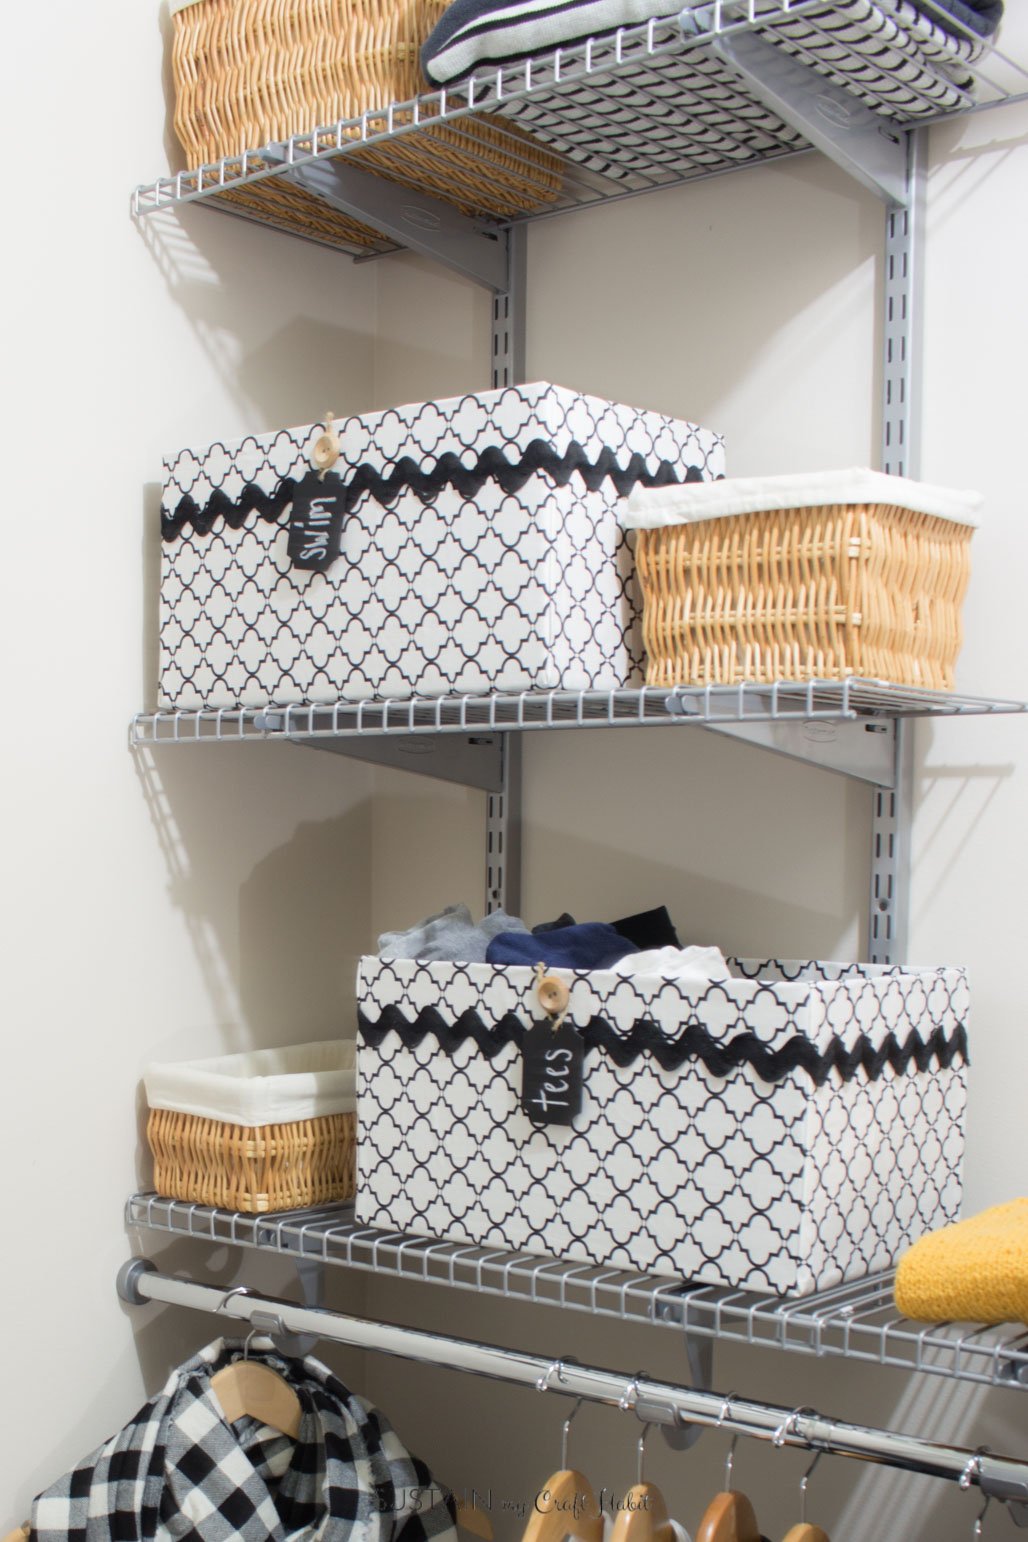 The completed fabric-covered storage boxes arranged on a wire shelving unit in a closet.